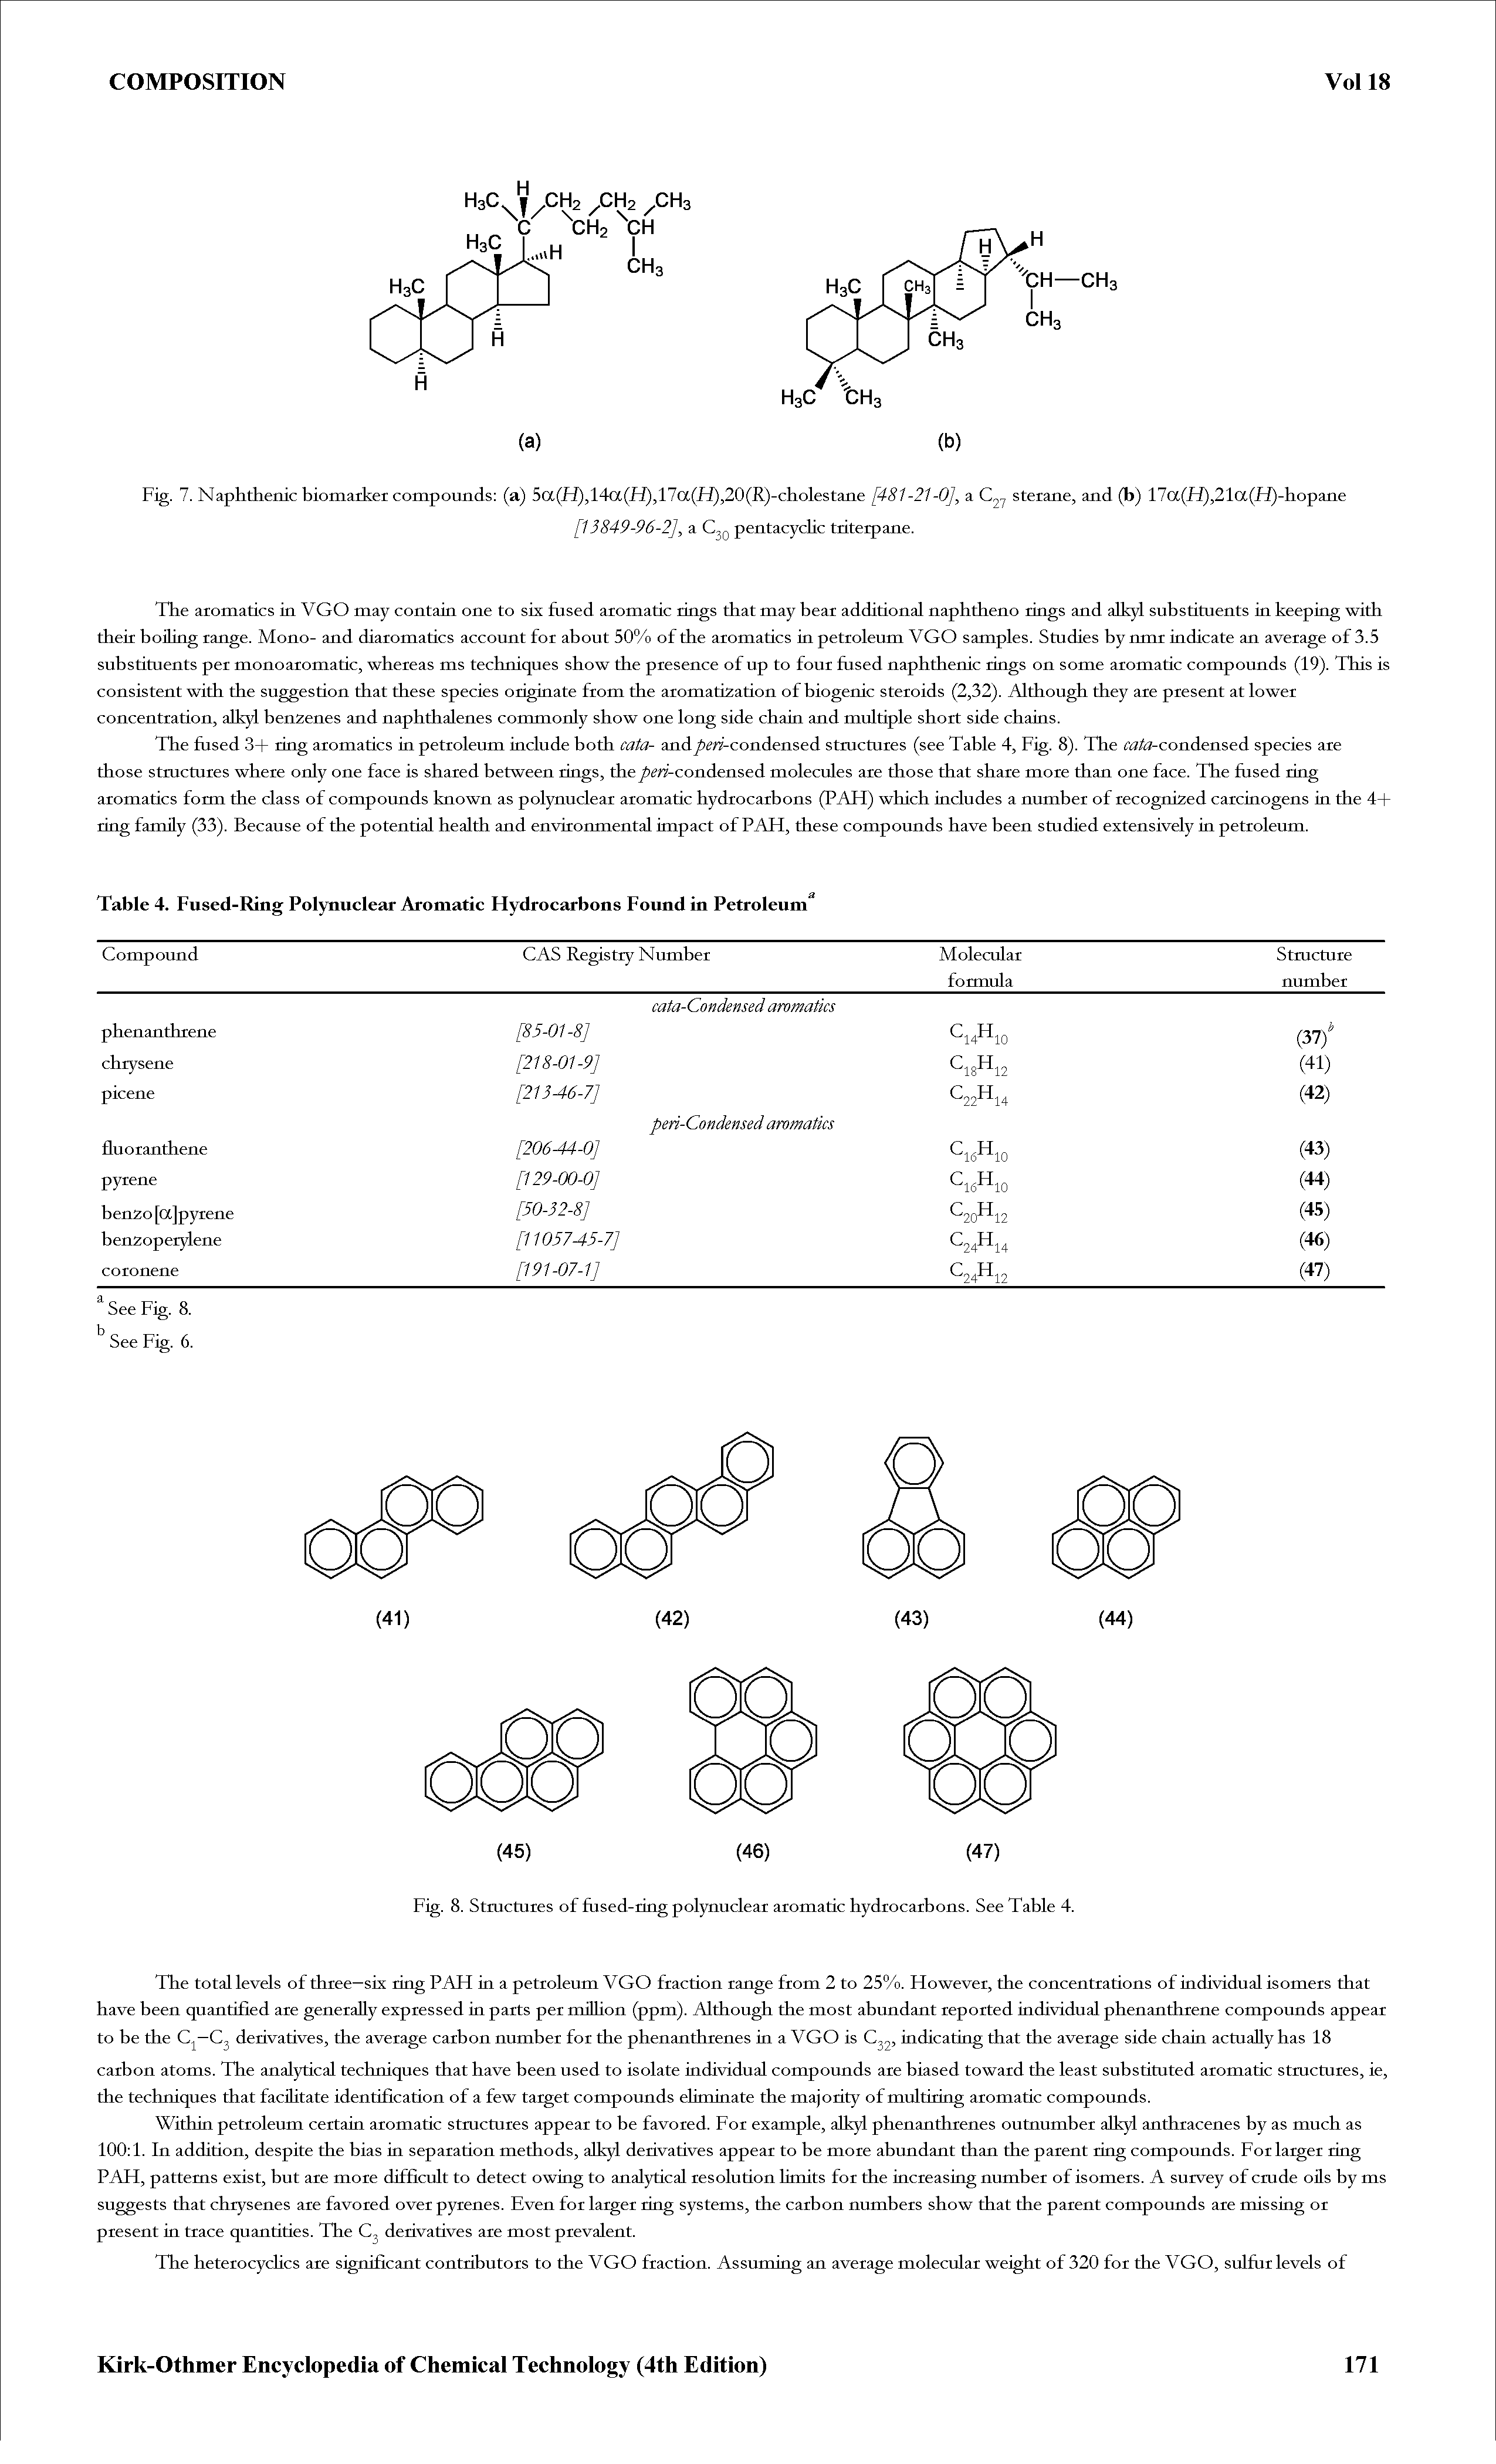 Table 4. Fused-Ring Polynuclear Aromatic Hydrocarbons Found in Petroleum ...